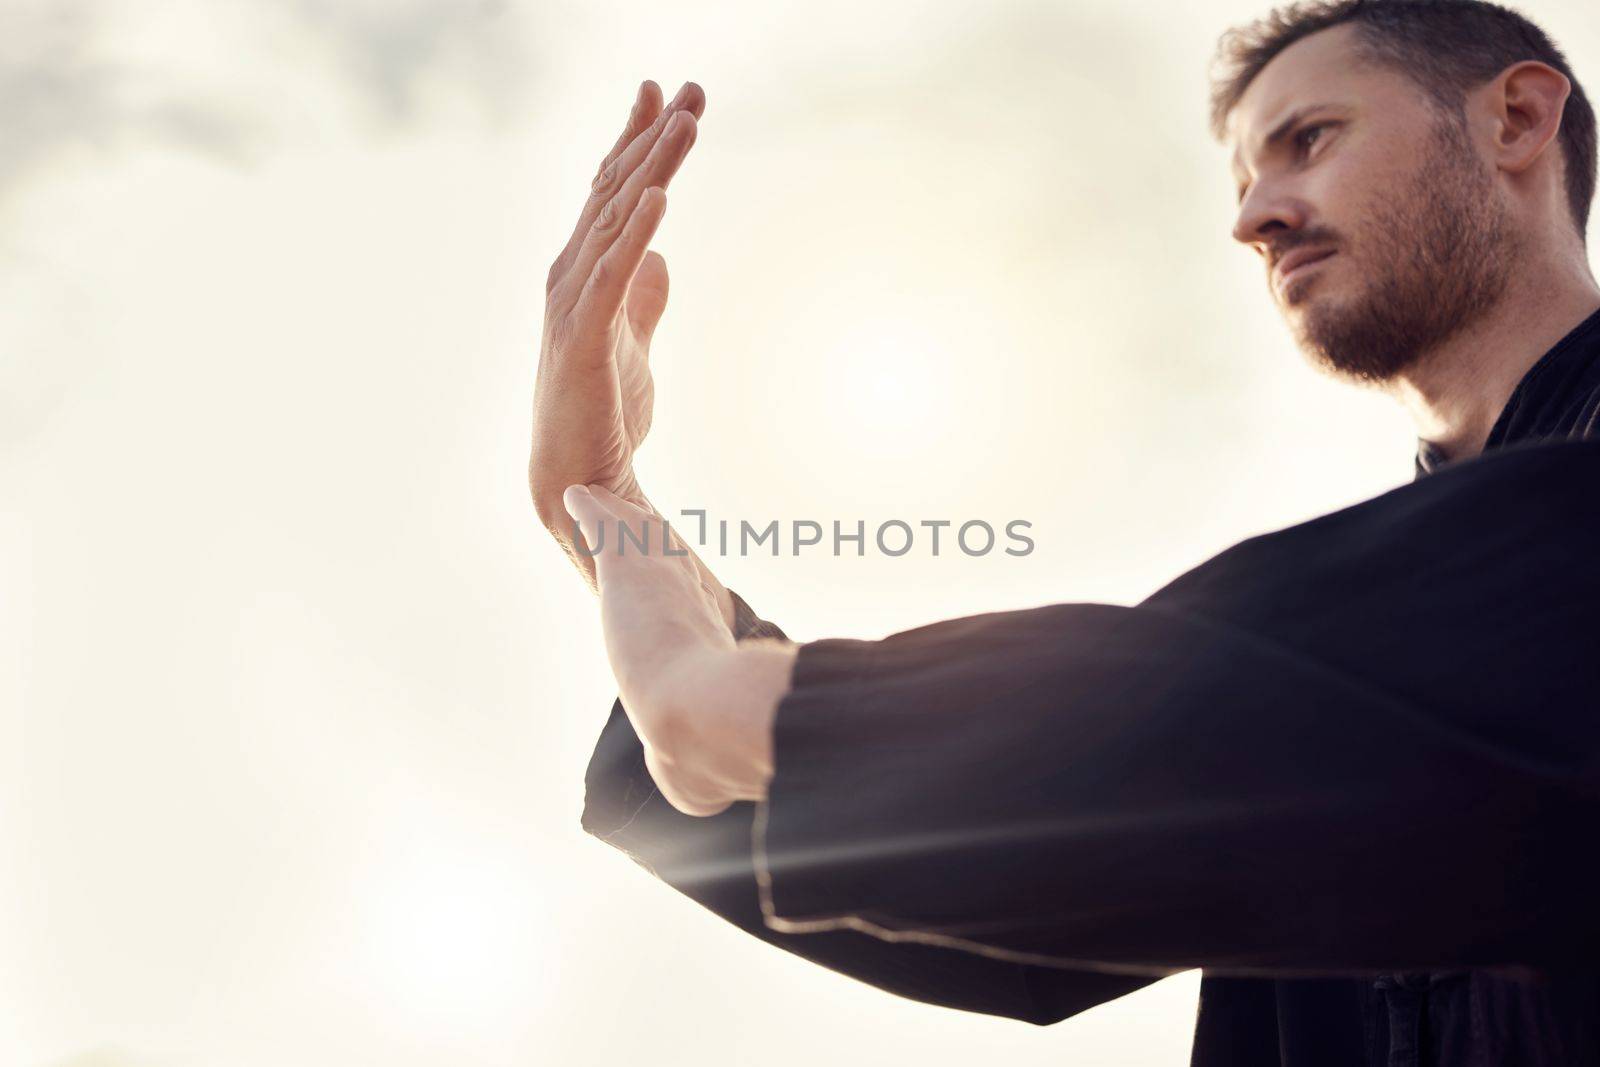 Karate, tai chi wellness or man on beach, sea or ocean for zen, fitness training or sports health in sunset lens flare. Focus, mindset or athlete for chakra exercise, peace or defense workout outdoor.